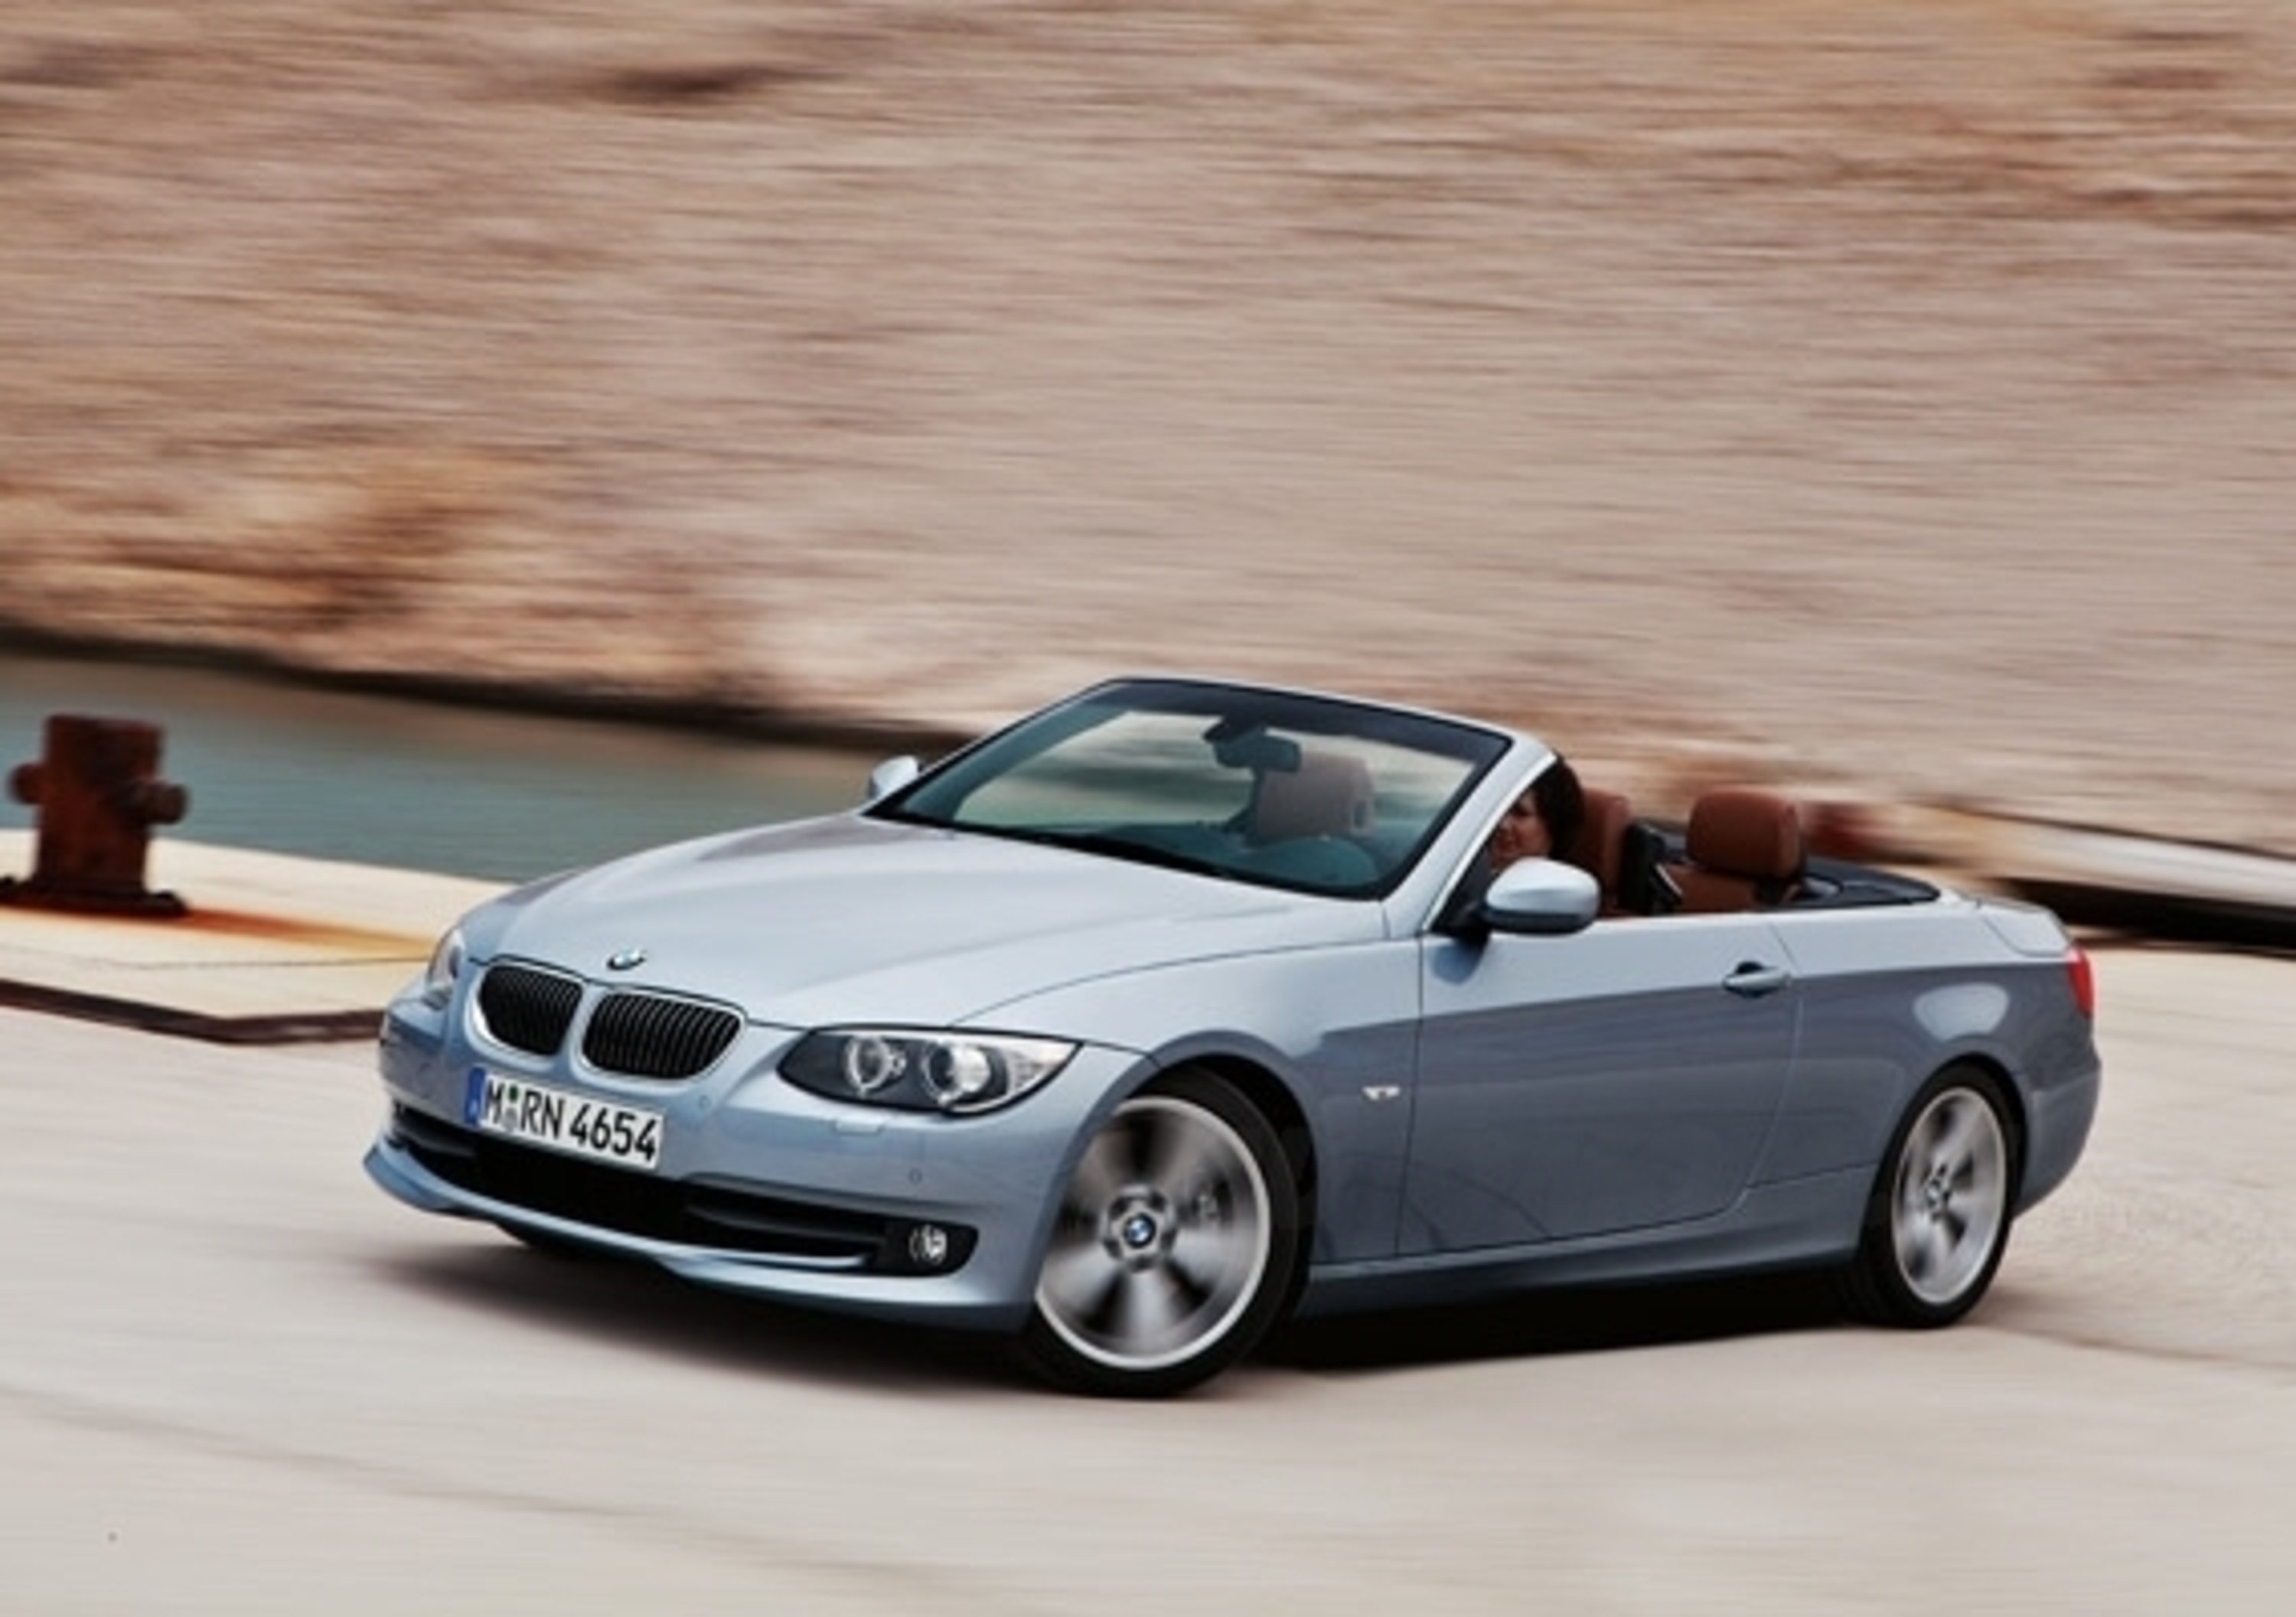 BMW Serie 3 Coup&egrave; e Cabrio restyling